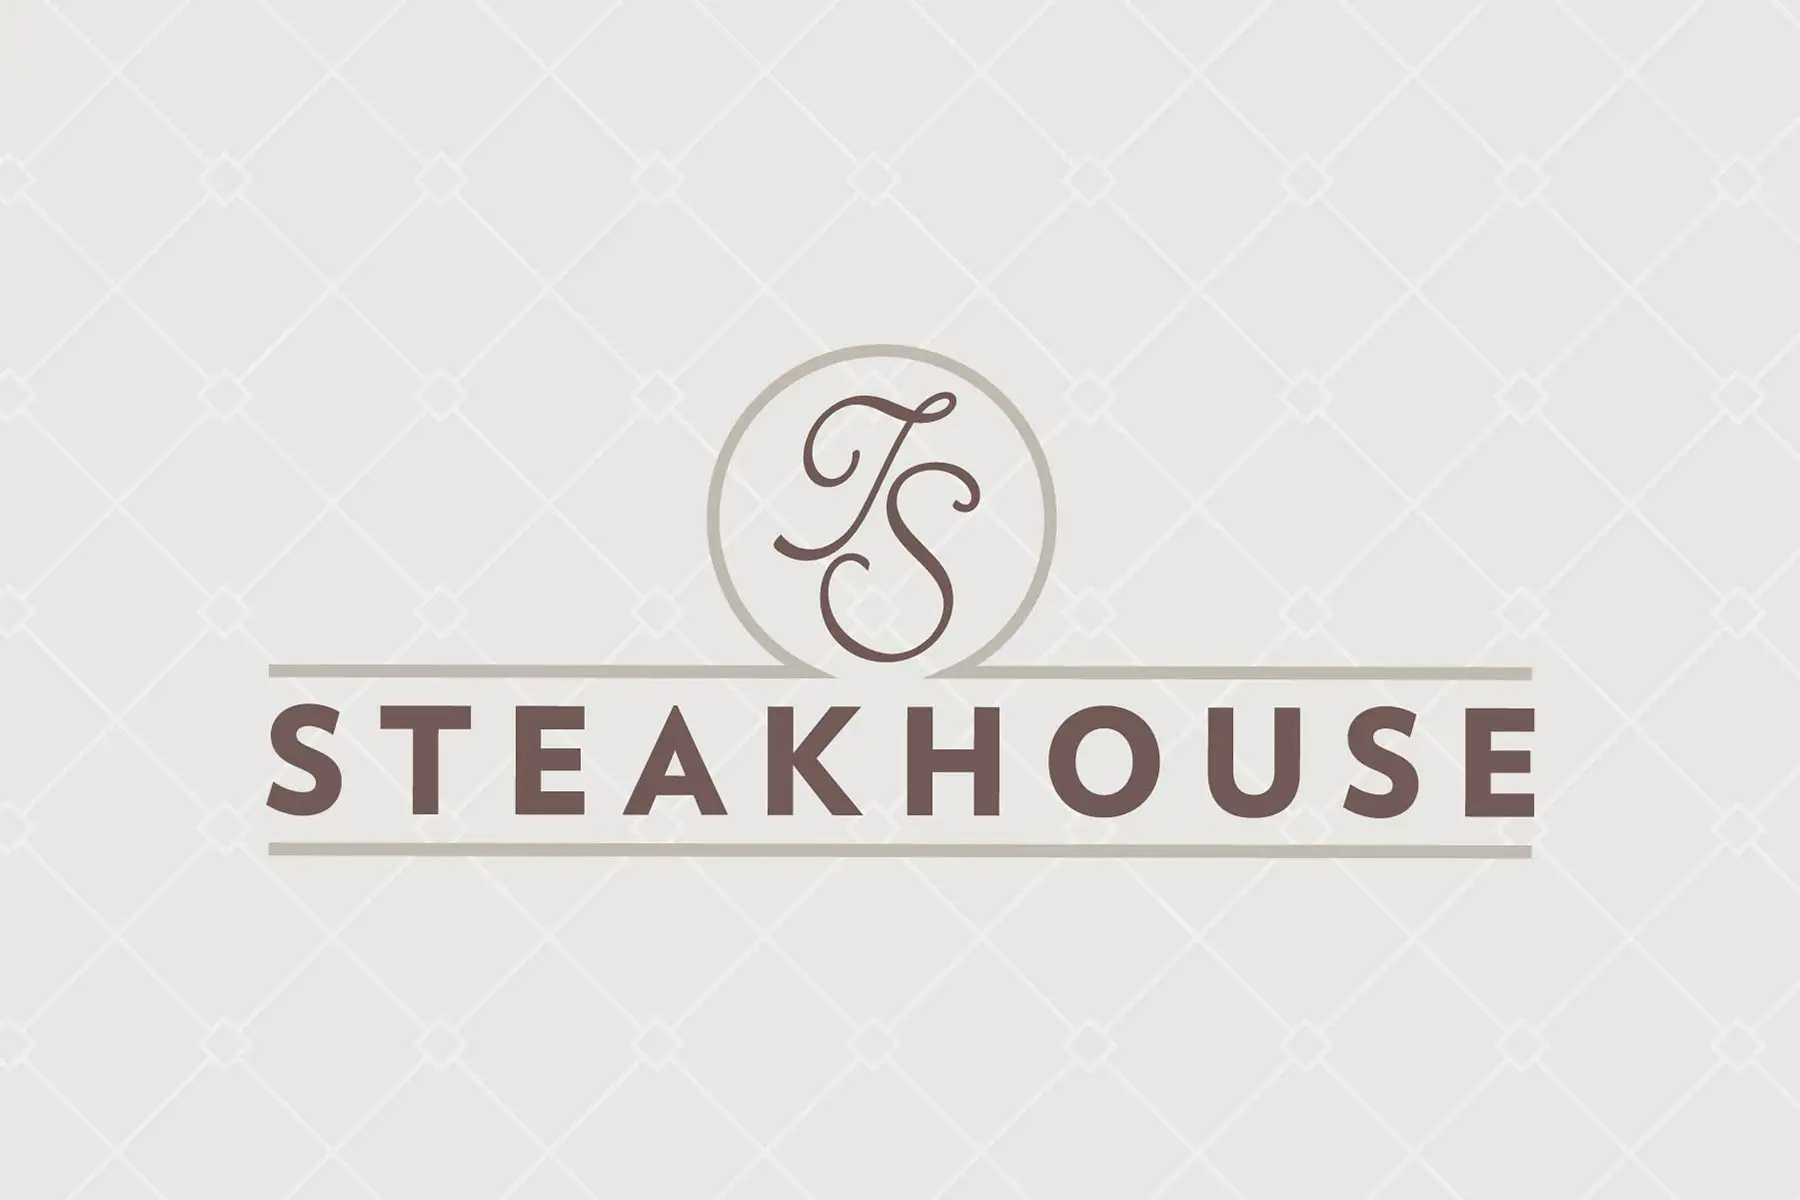 TS Steakhouse Logo white and gold